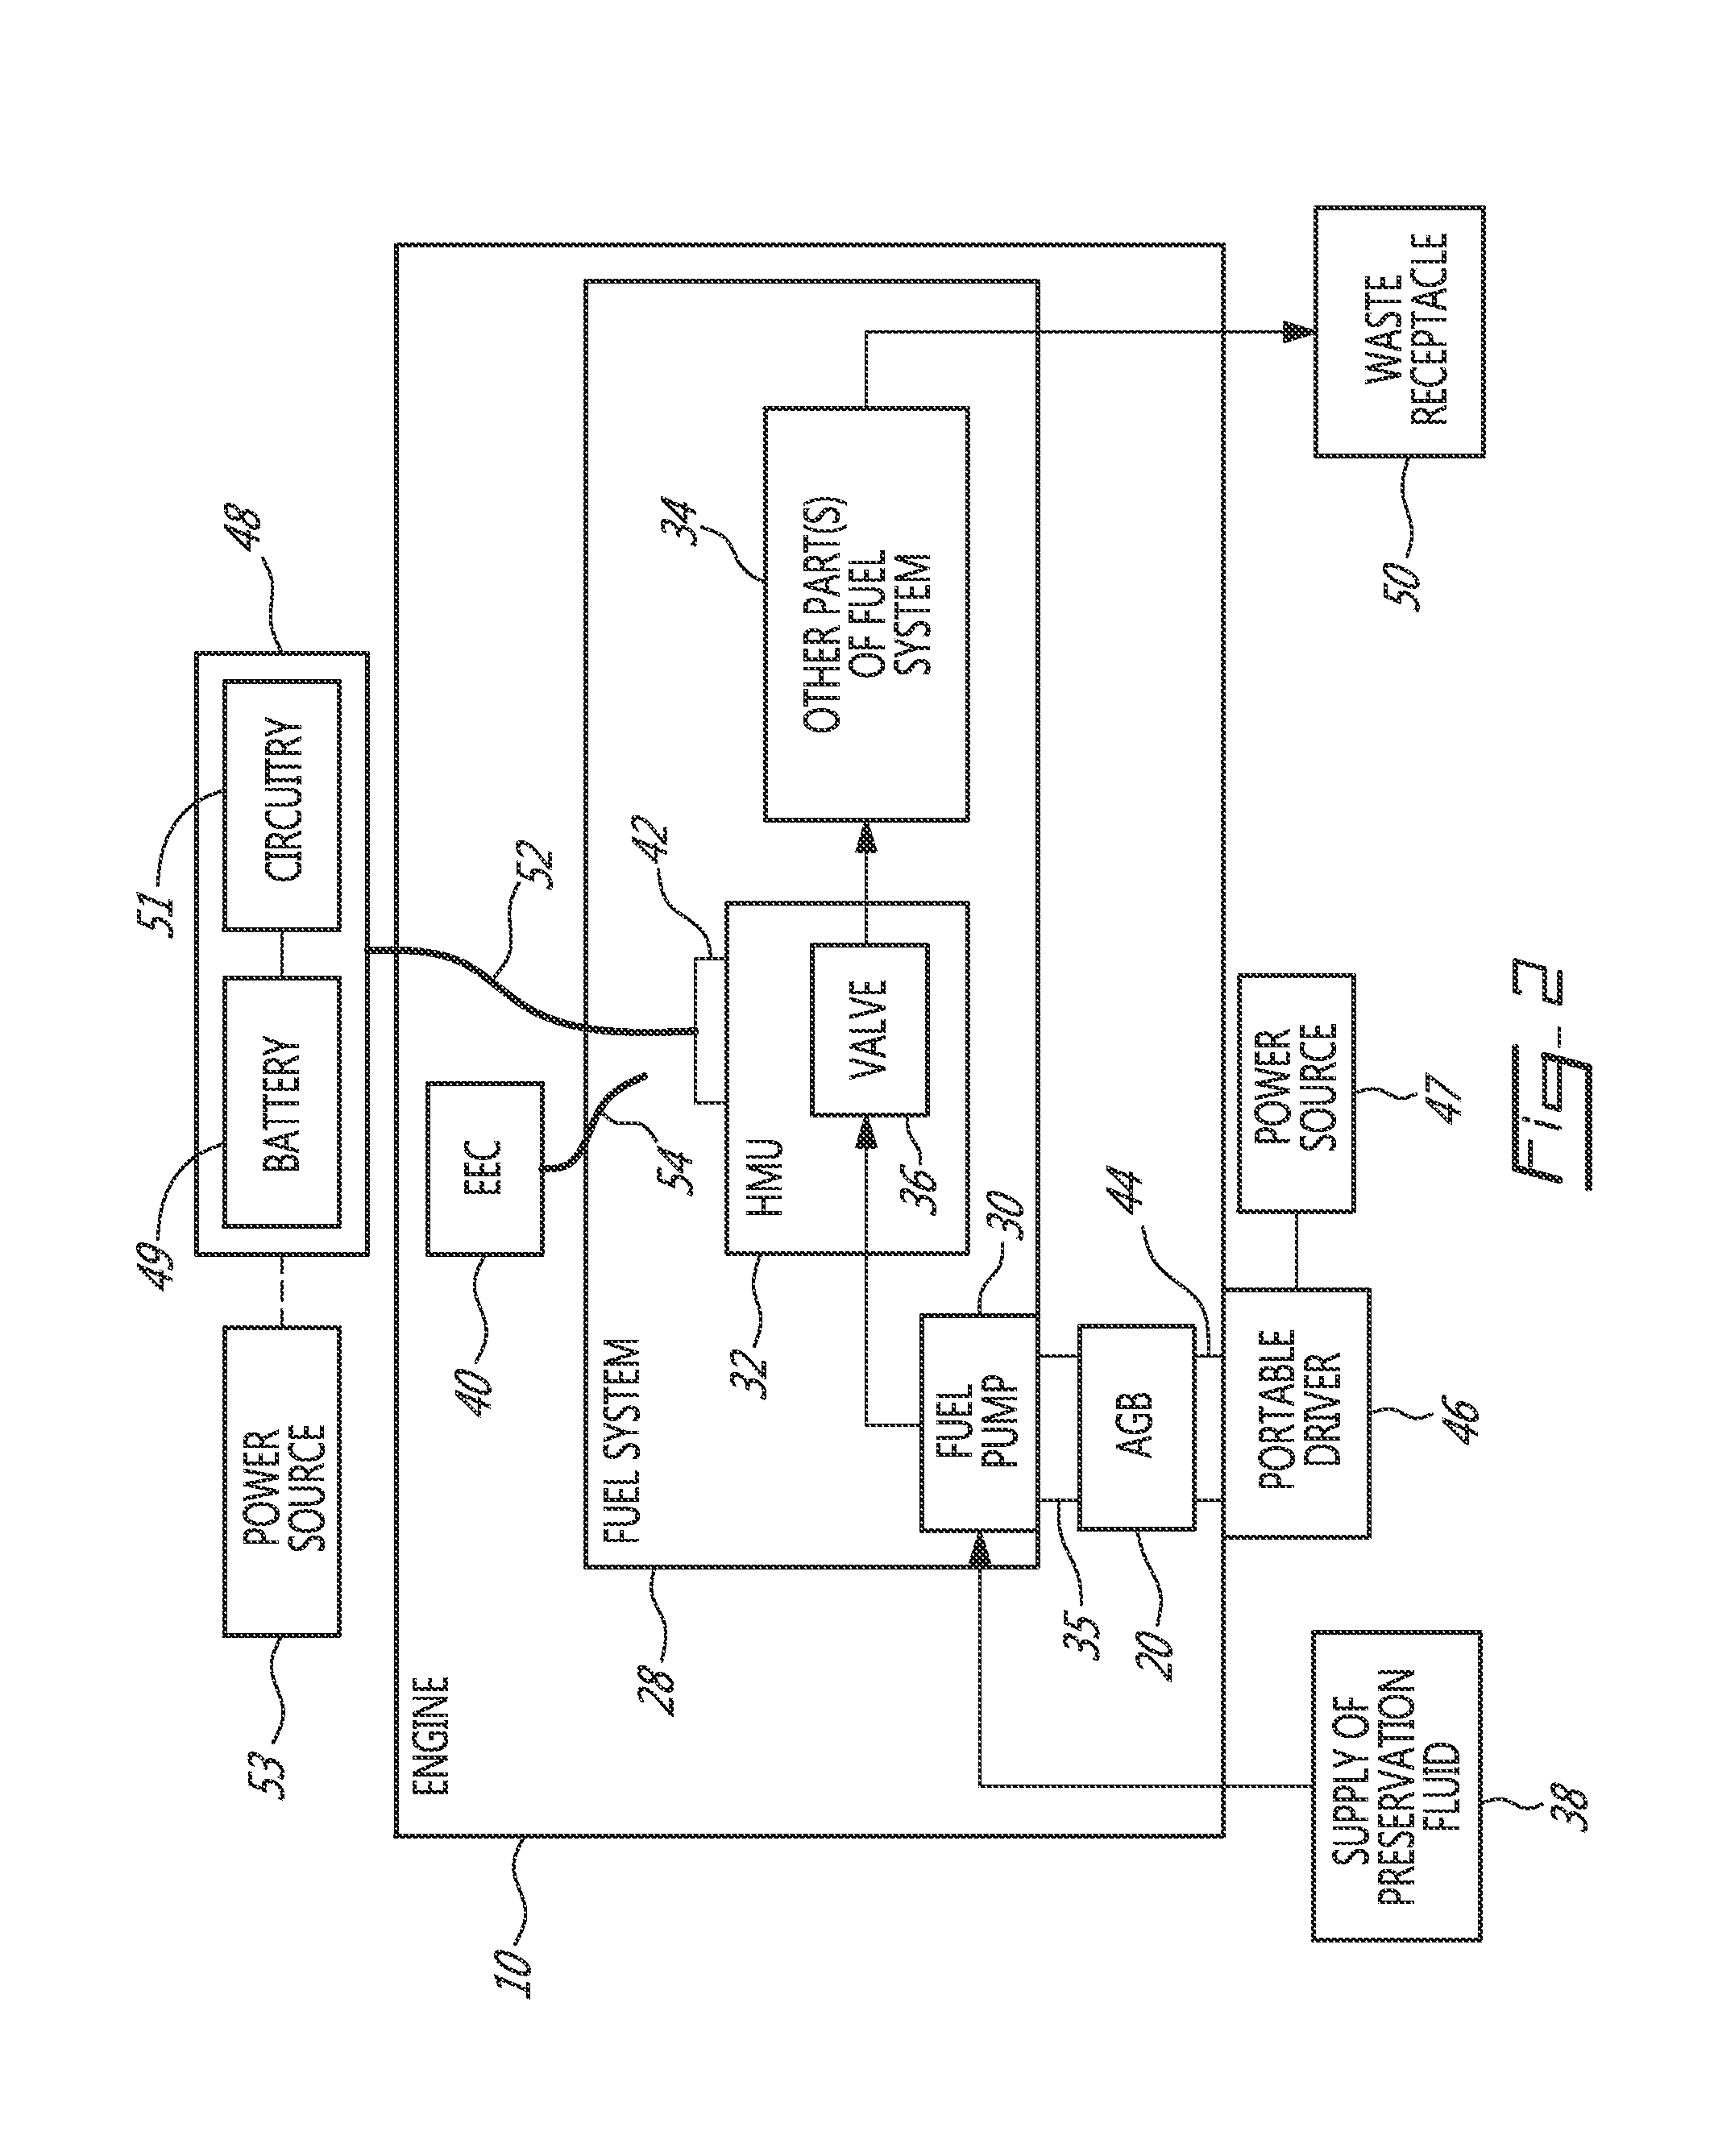 Method and kit for preserving a fuel system of an aircraft engine